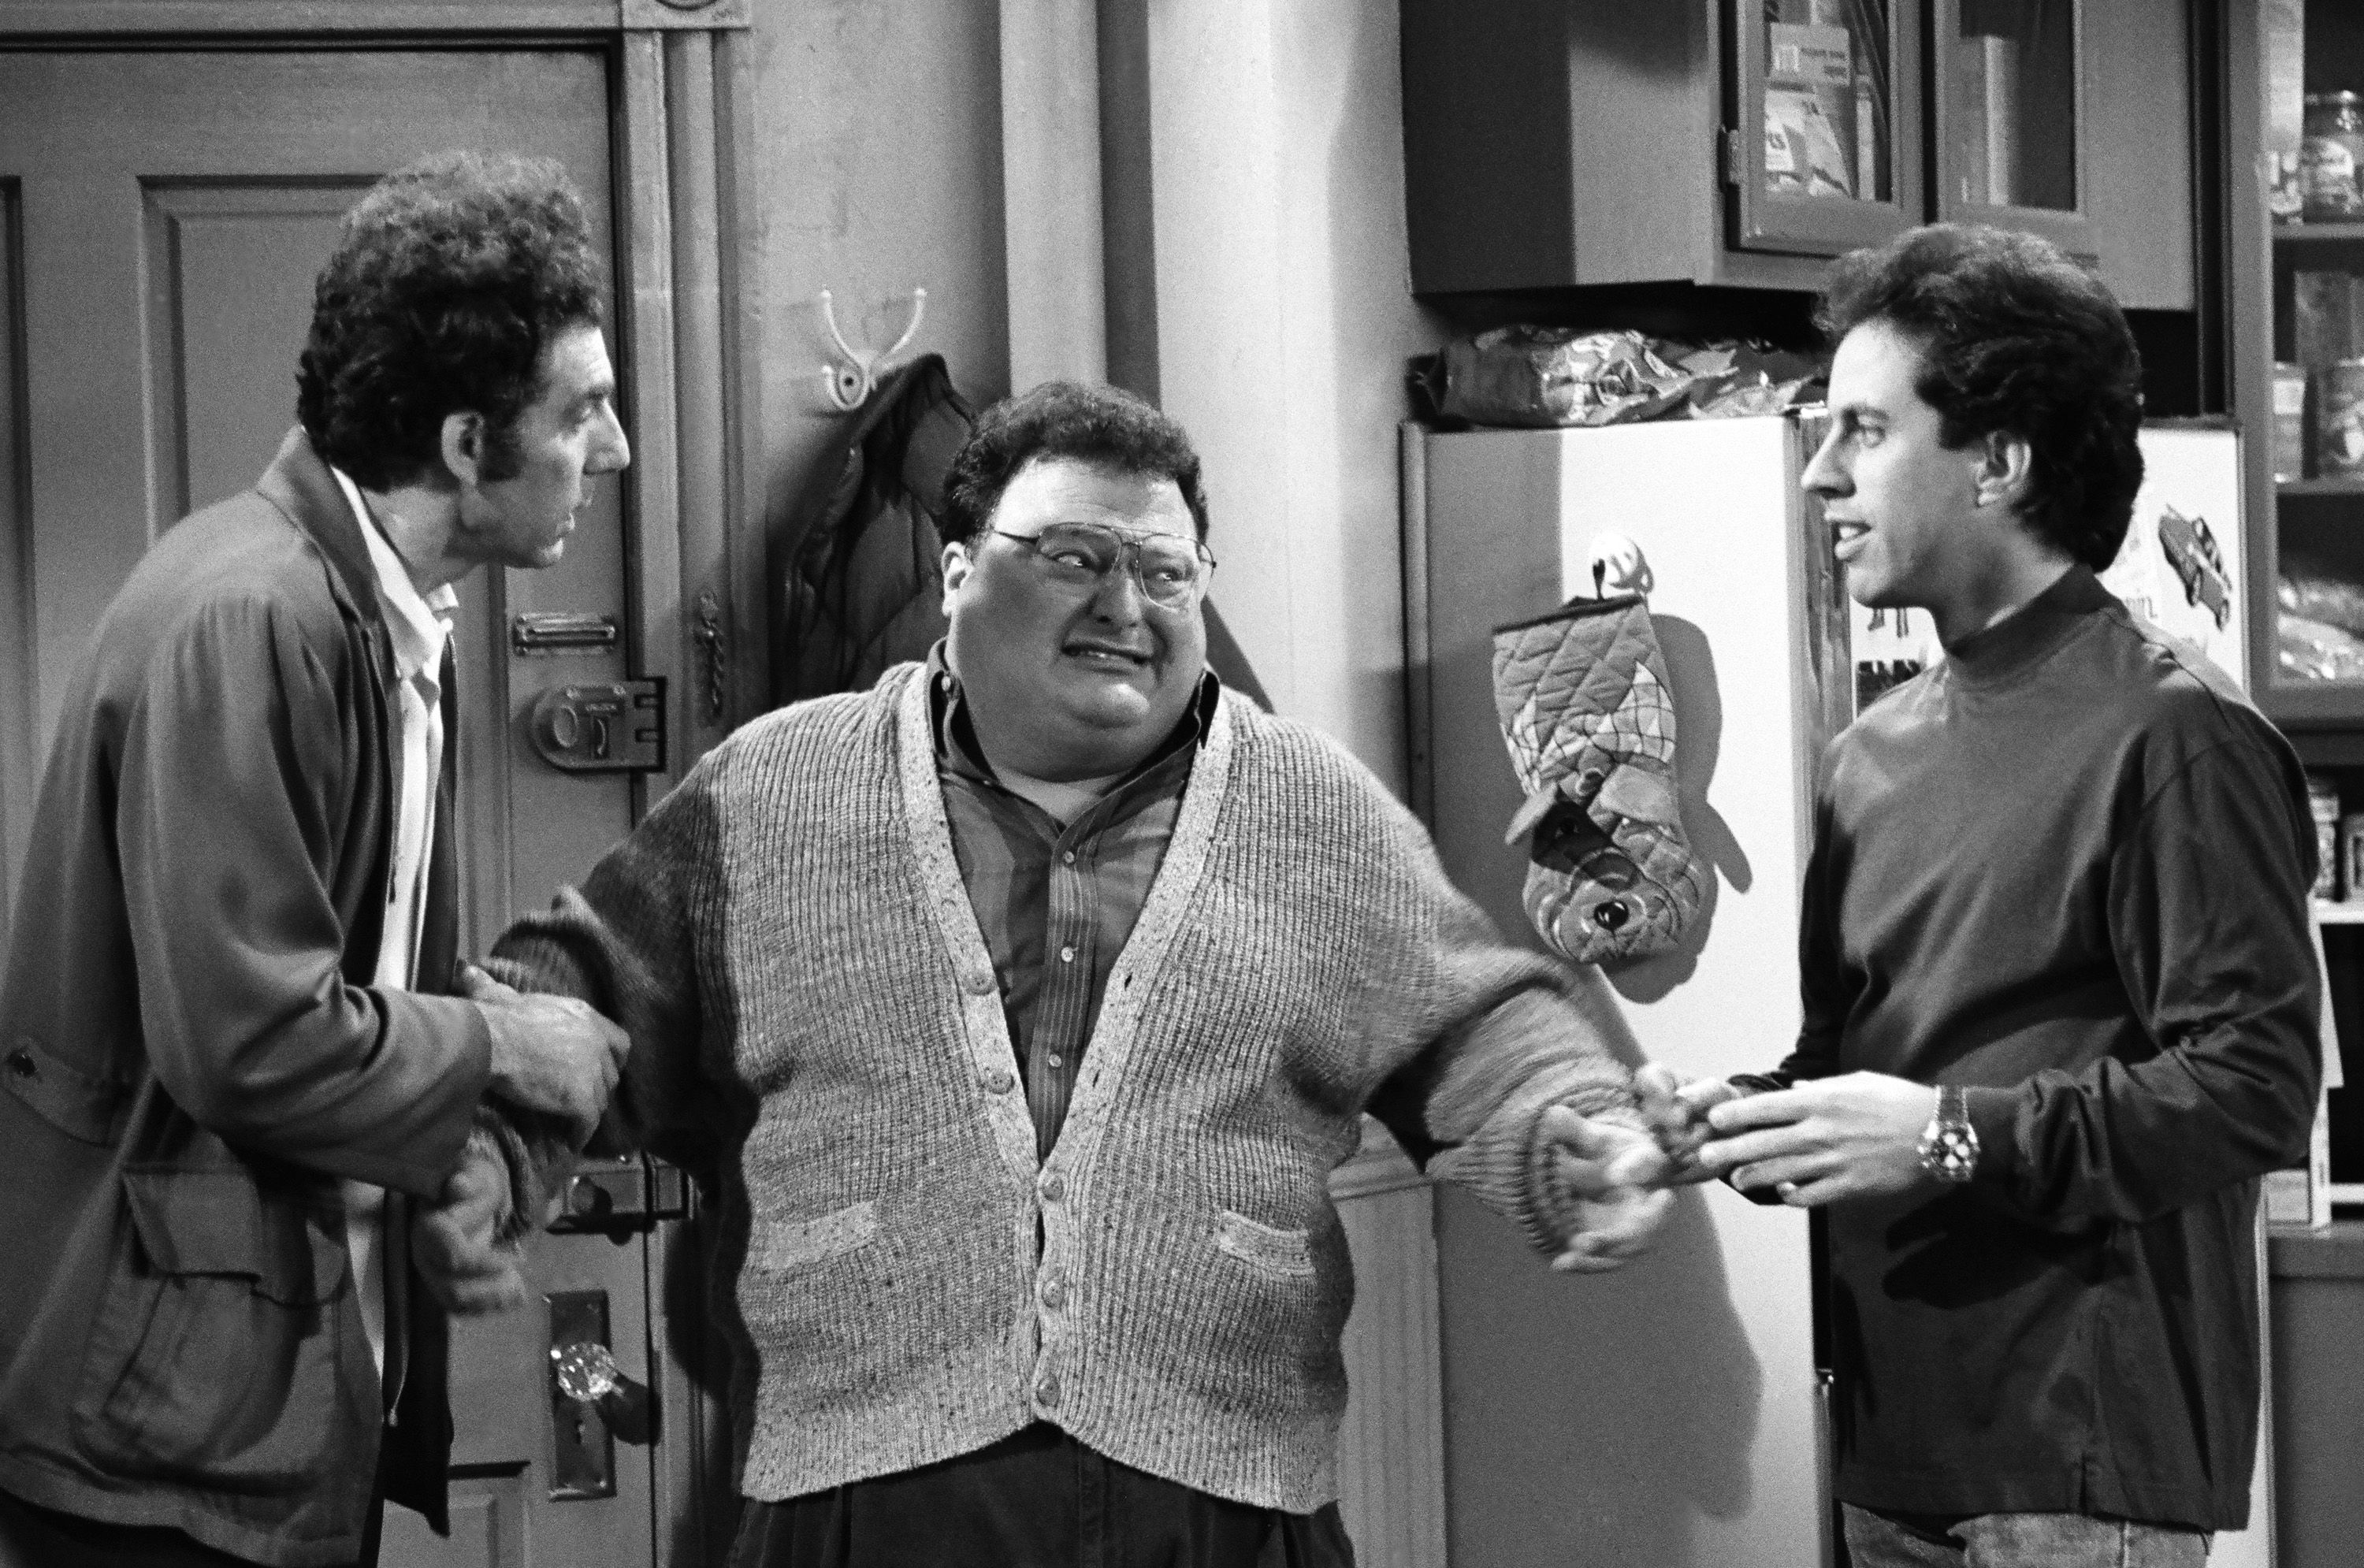 Cosmo Kramer, Newman and Jerry Seinfeld in Jerry's apartment during an episode of 'Seinfeld' 